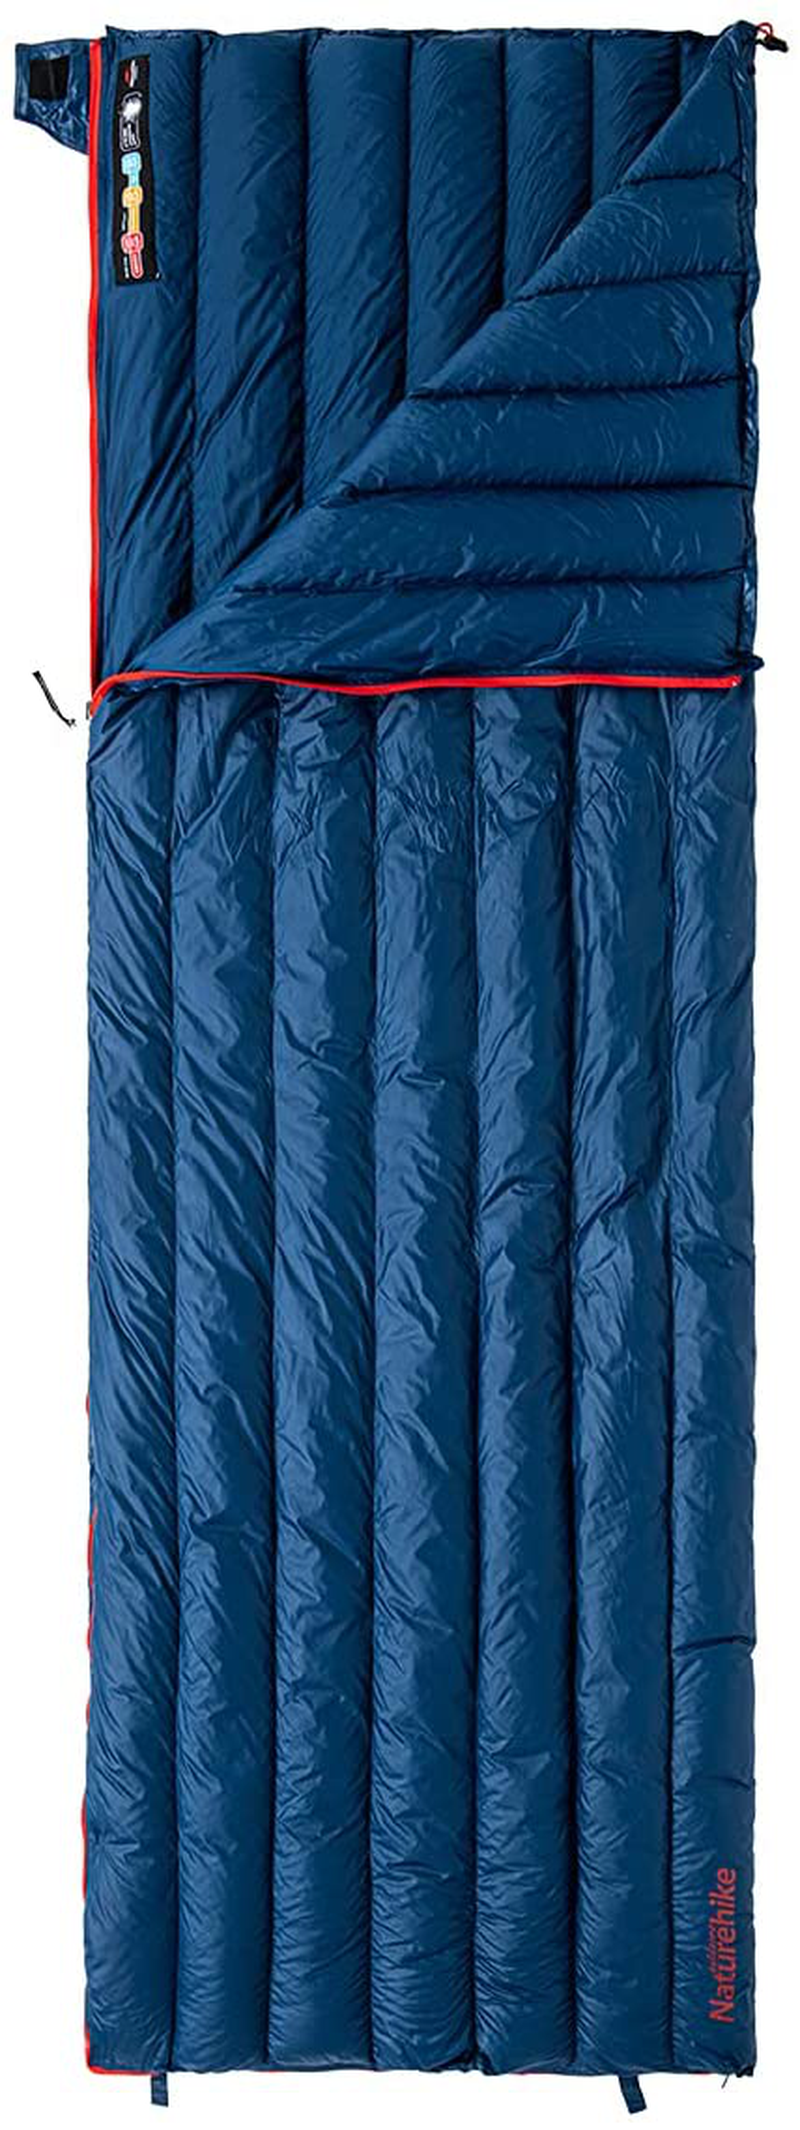 Naturehike 1.26Lbs Ultralight 800 Fill Power Goose down Sleeping Bag - Ultra Compact down Filled Lightweight Backpack Envelope Sleeping Bag for Hiking Camping